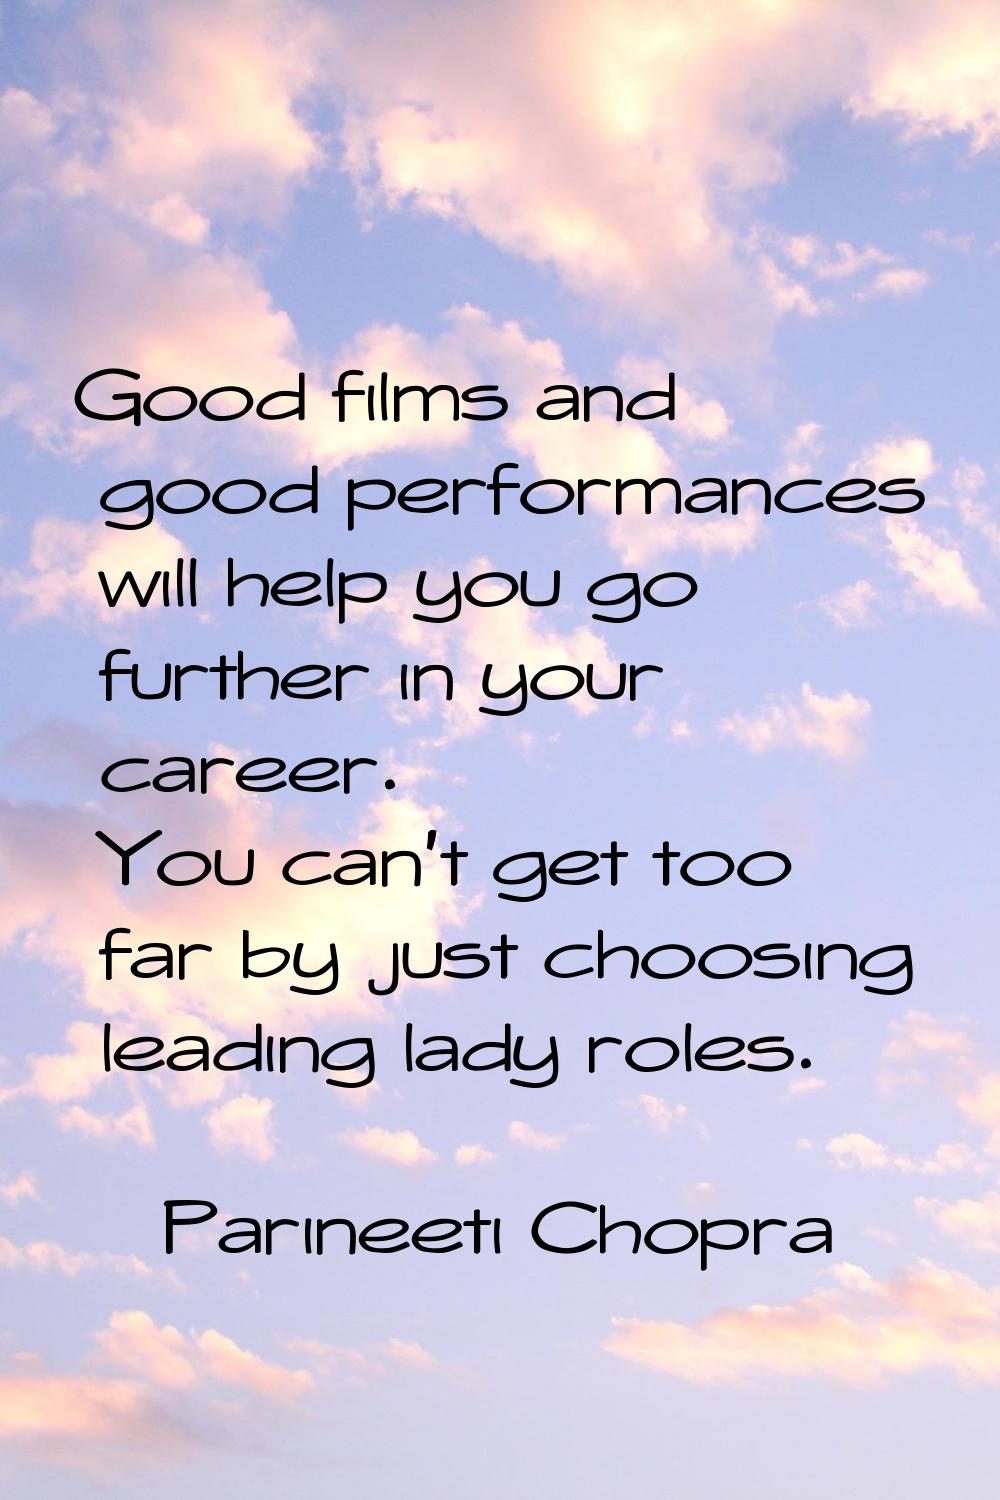 Good films and good performances will help you go further in your career. You can't get too far by 